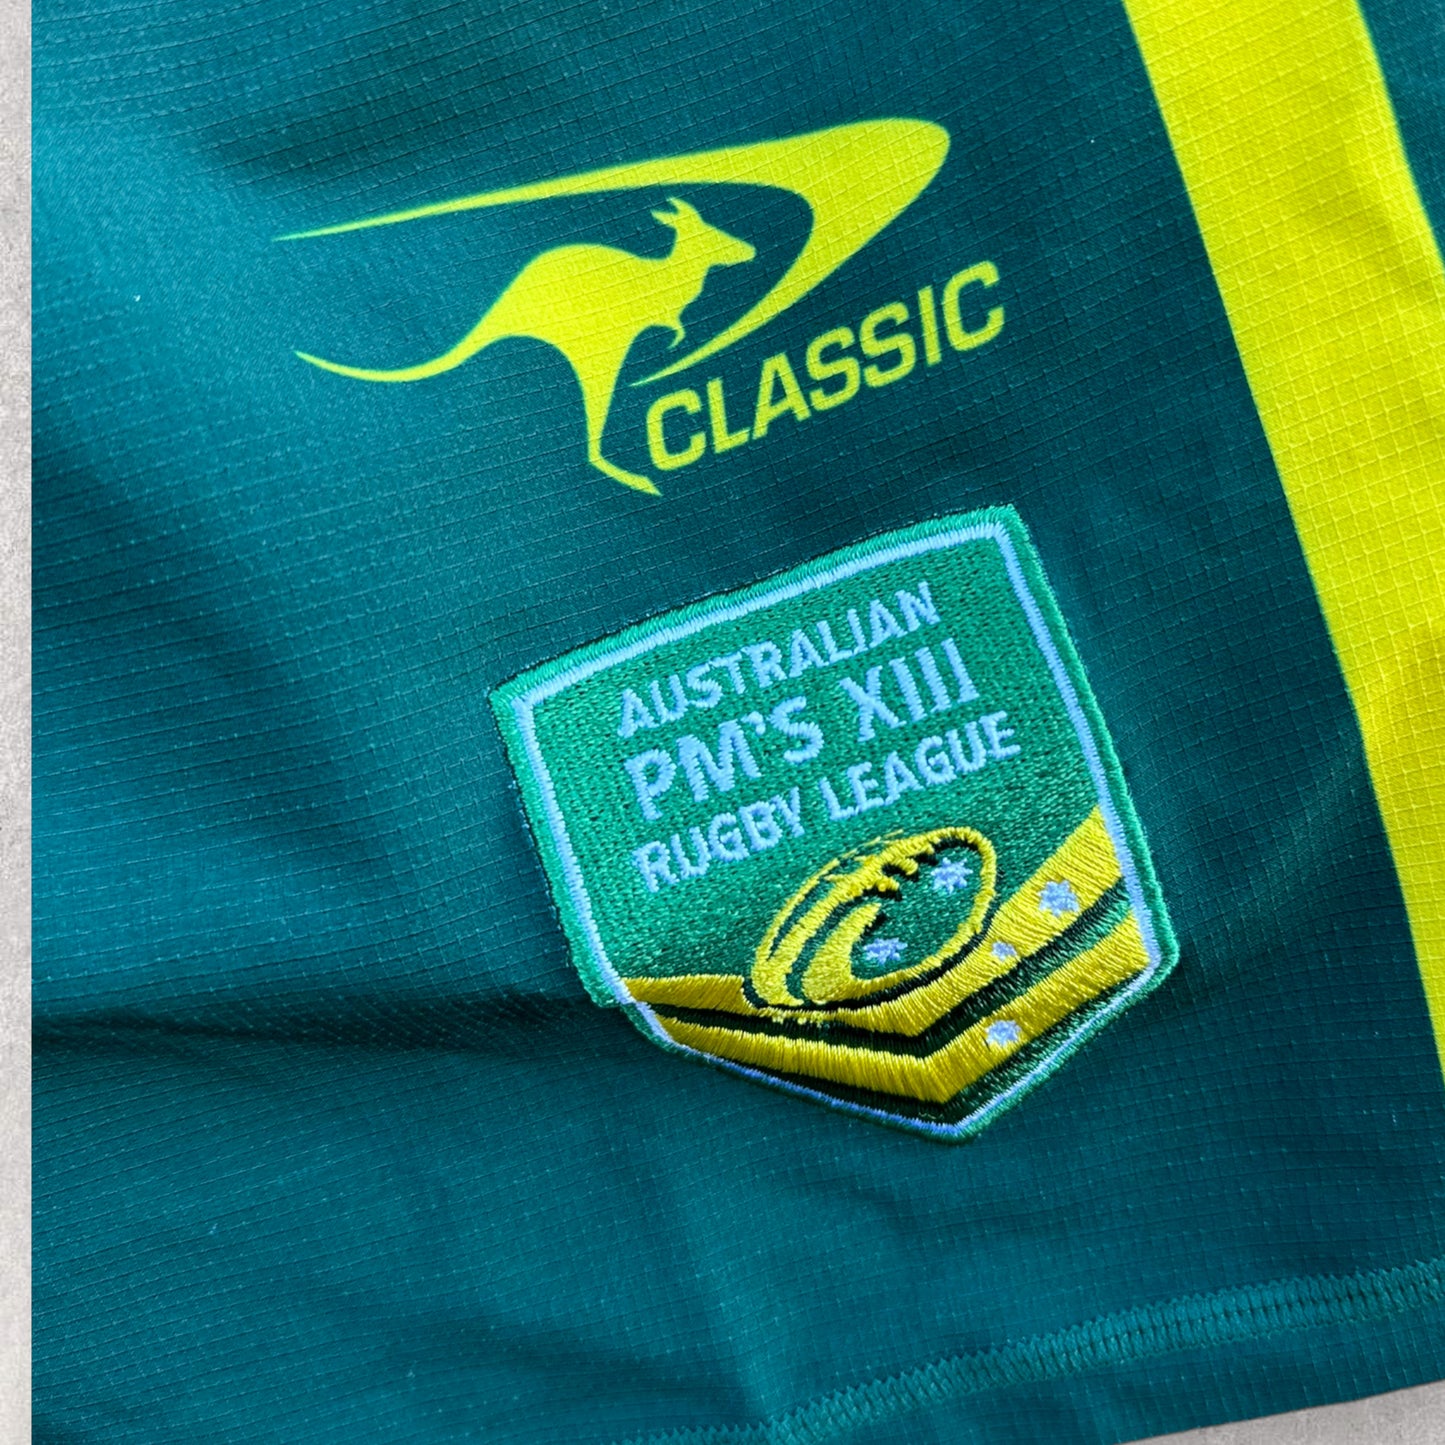 AUSTRALIAN PM’S XIII RUGBY LEAGUE MATCH SHORTS